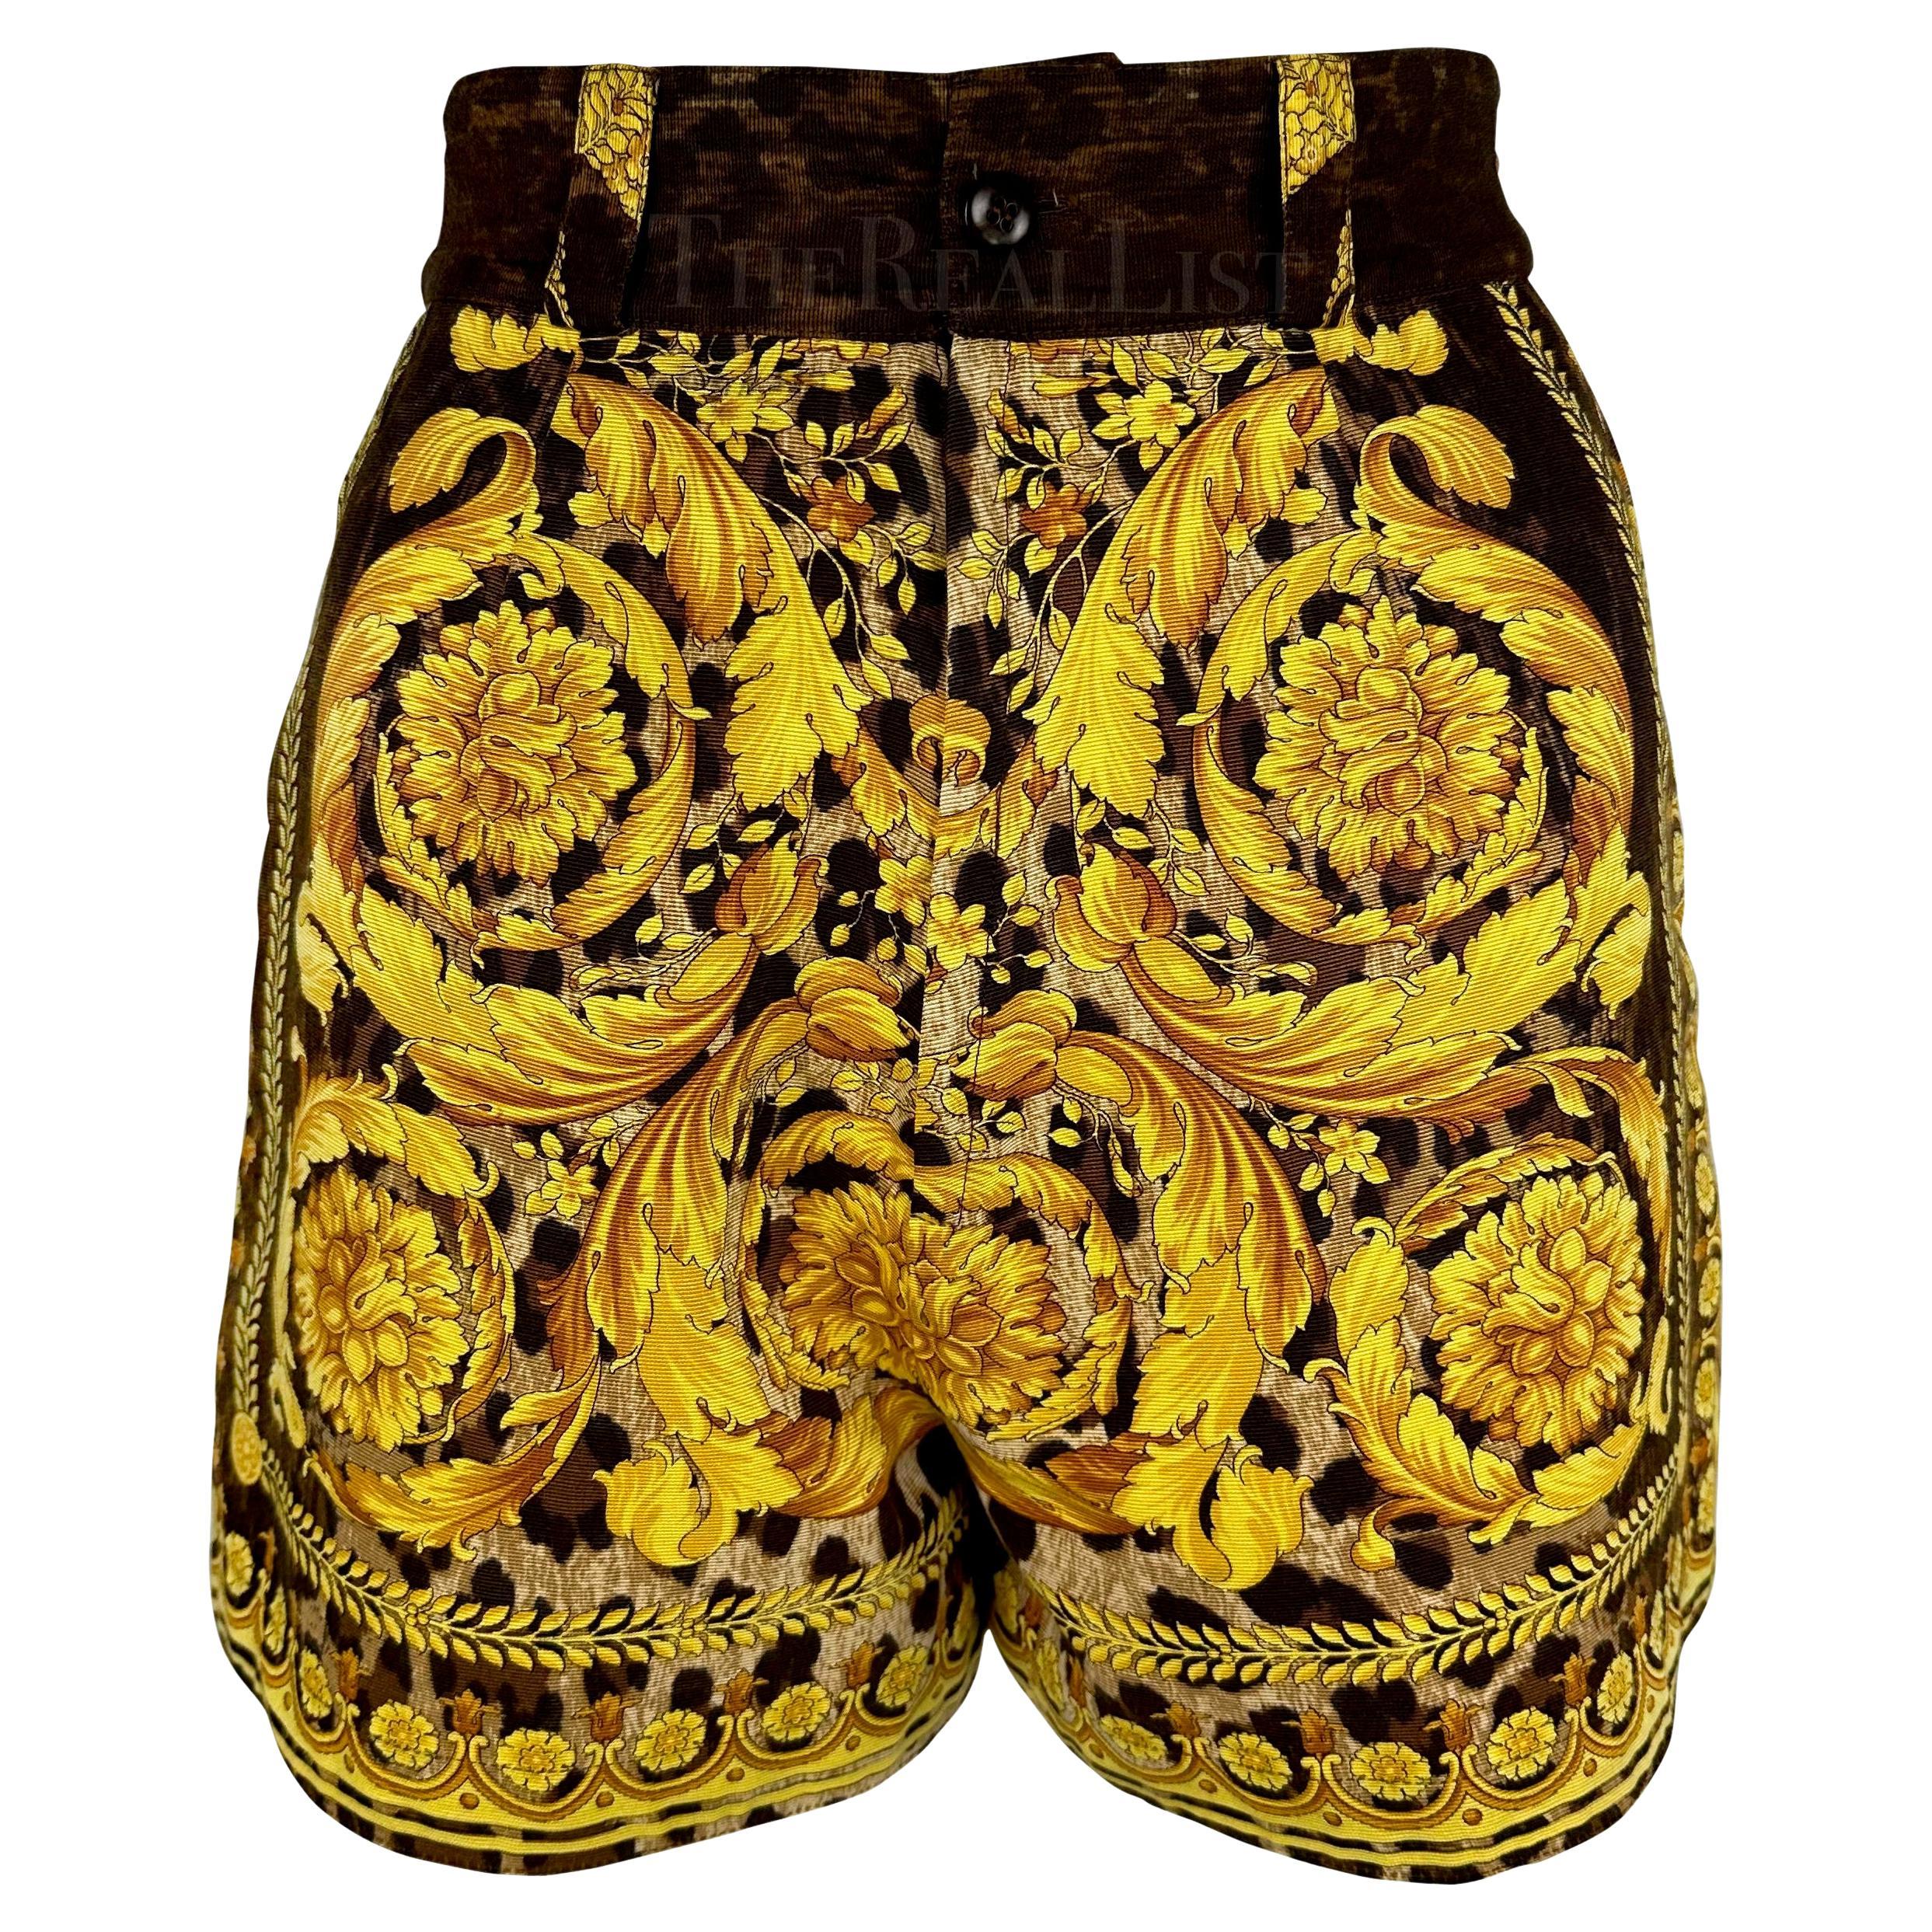 S/S 1992 Gianni Versace Runway Gold Baroque Leopard Print High Waisted Shorts For Sale